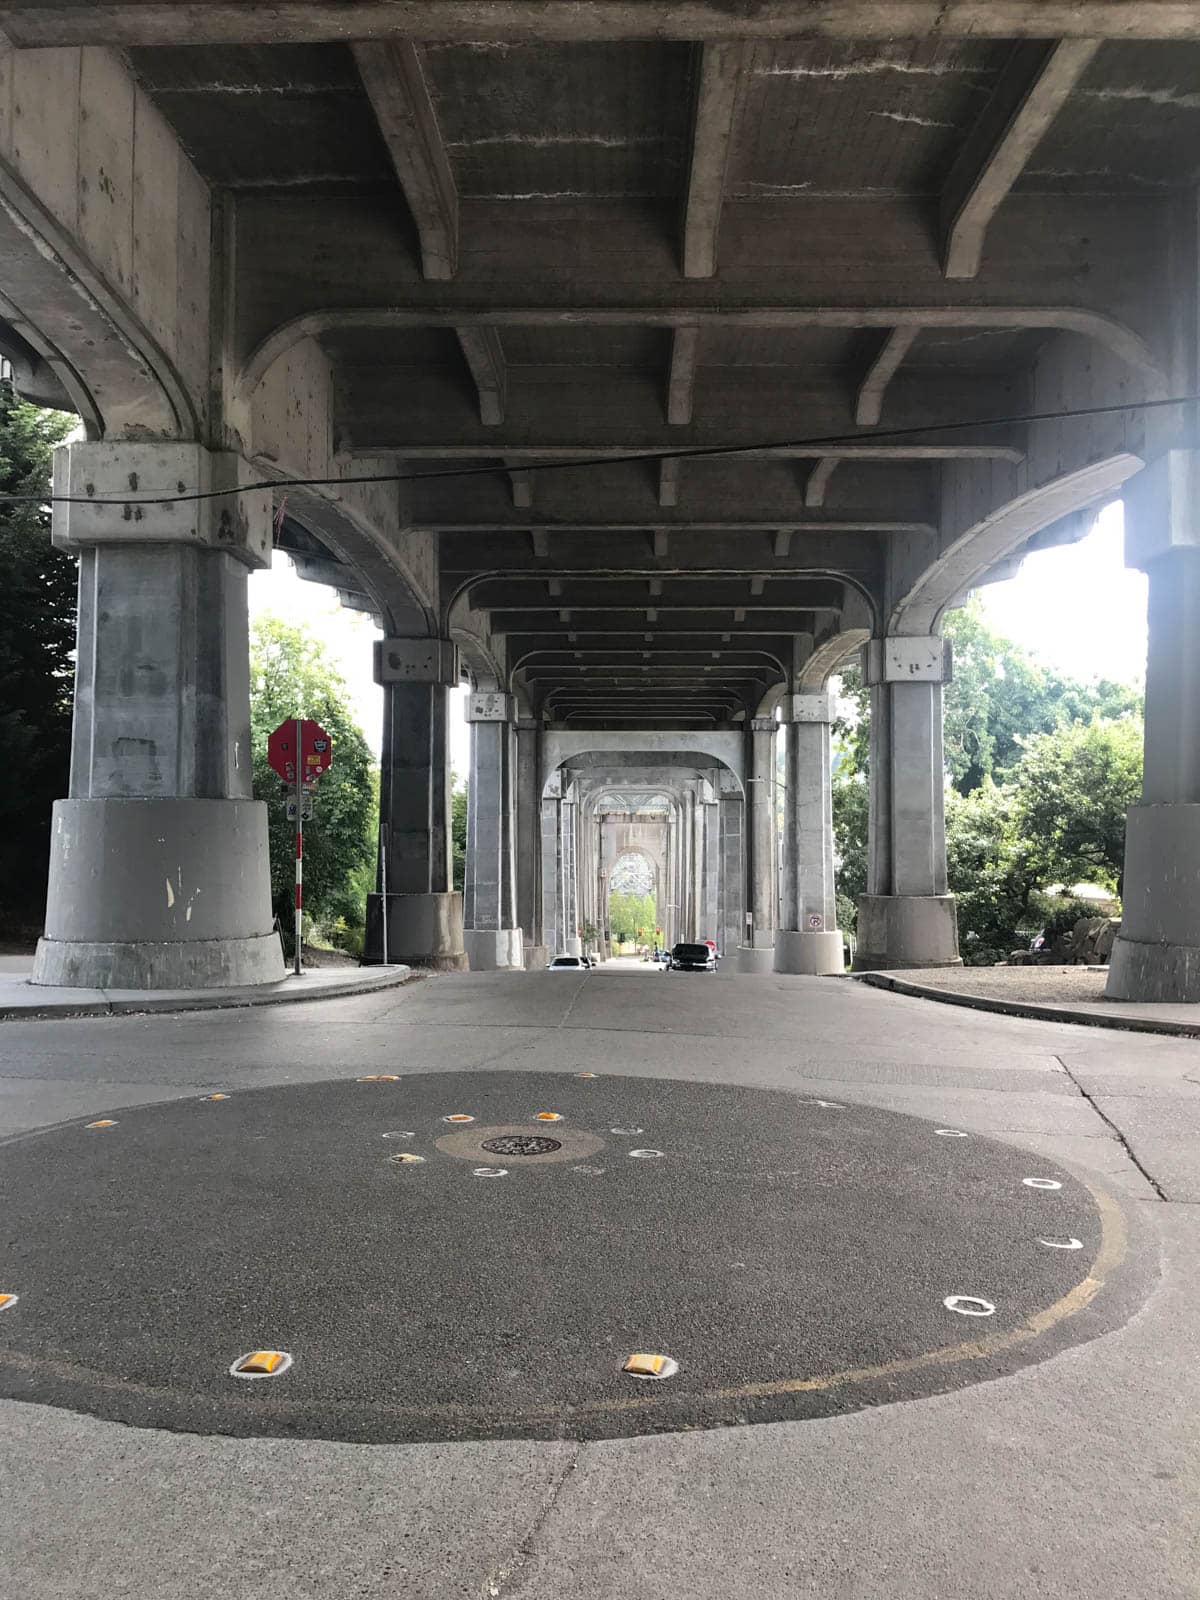 A view of the street under a bridge, across the length of the bridge. The bridgeâ€™s pillars are in view, and some cars can be seen in the distance parked by the sides of the street.